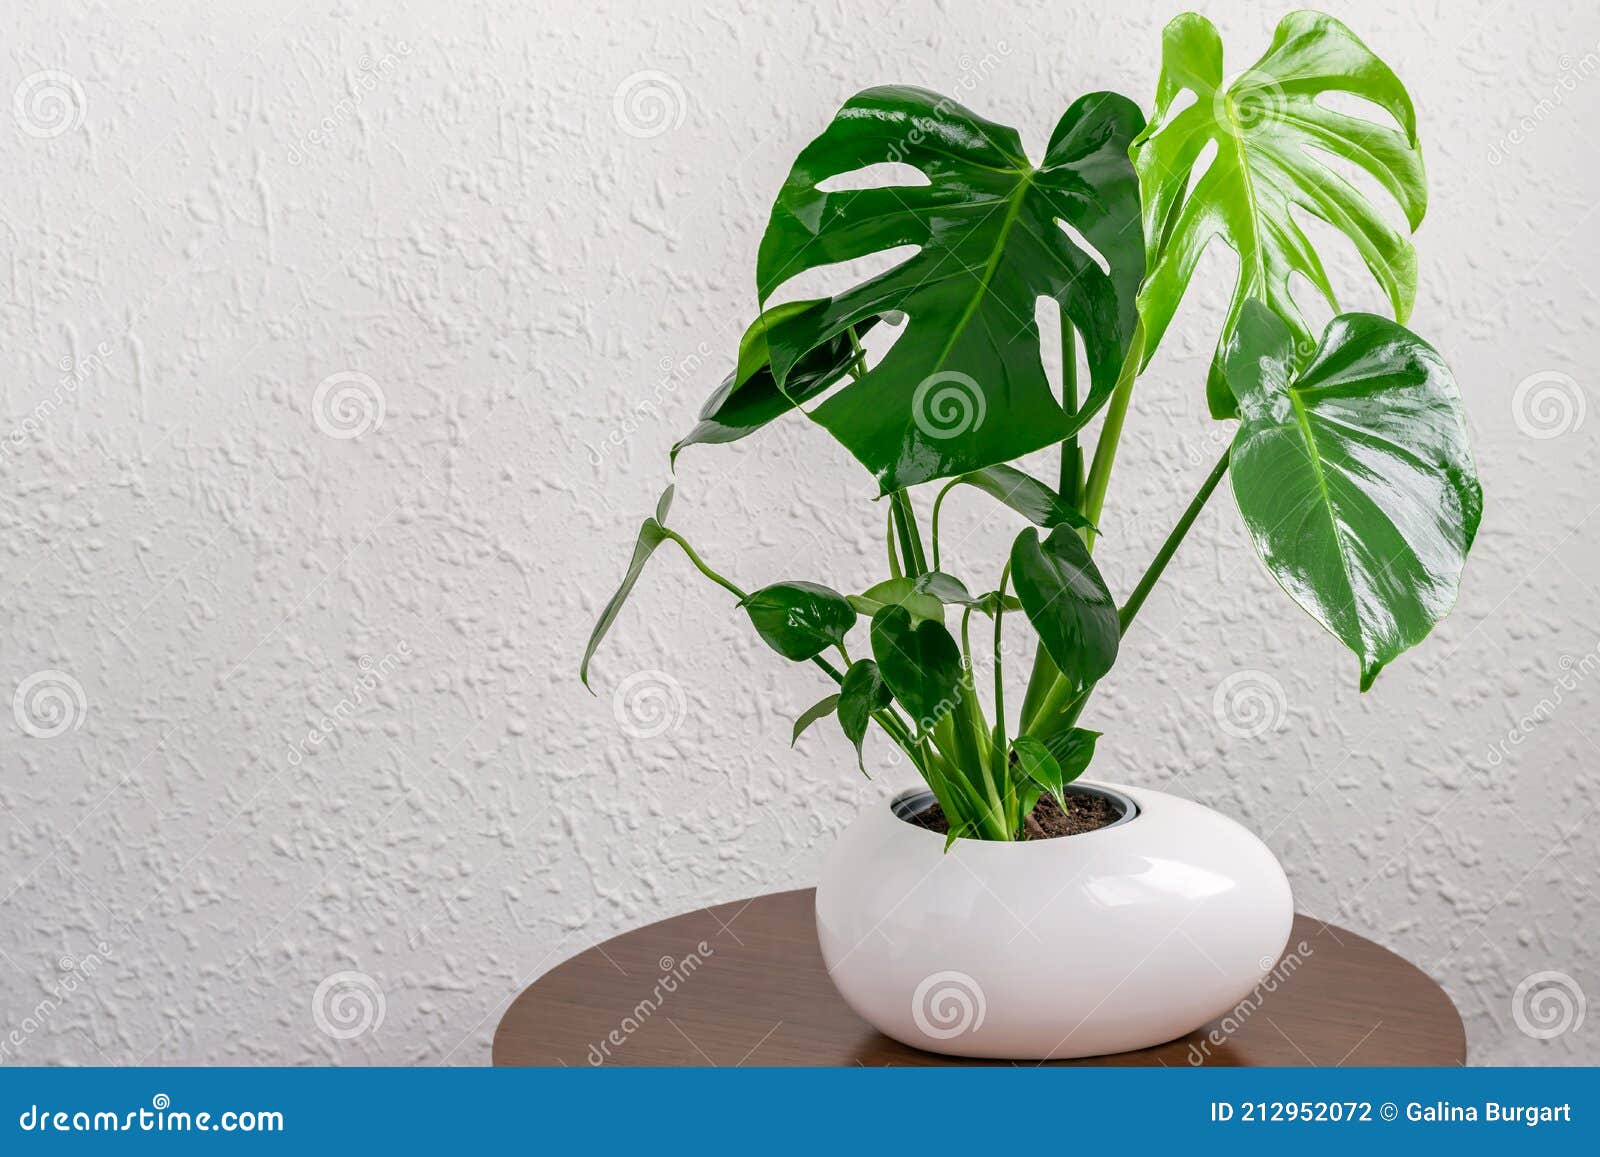 monstera deliciosa plant in white pot standing on the wooden round table on the white wall background. home gardening concept,